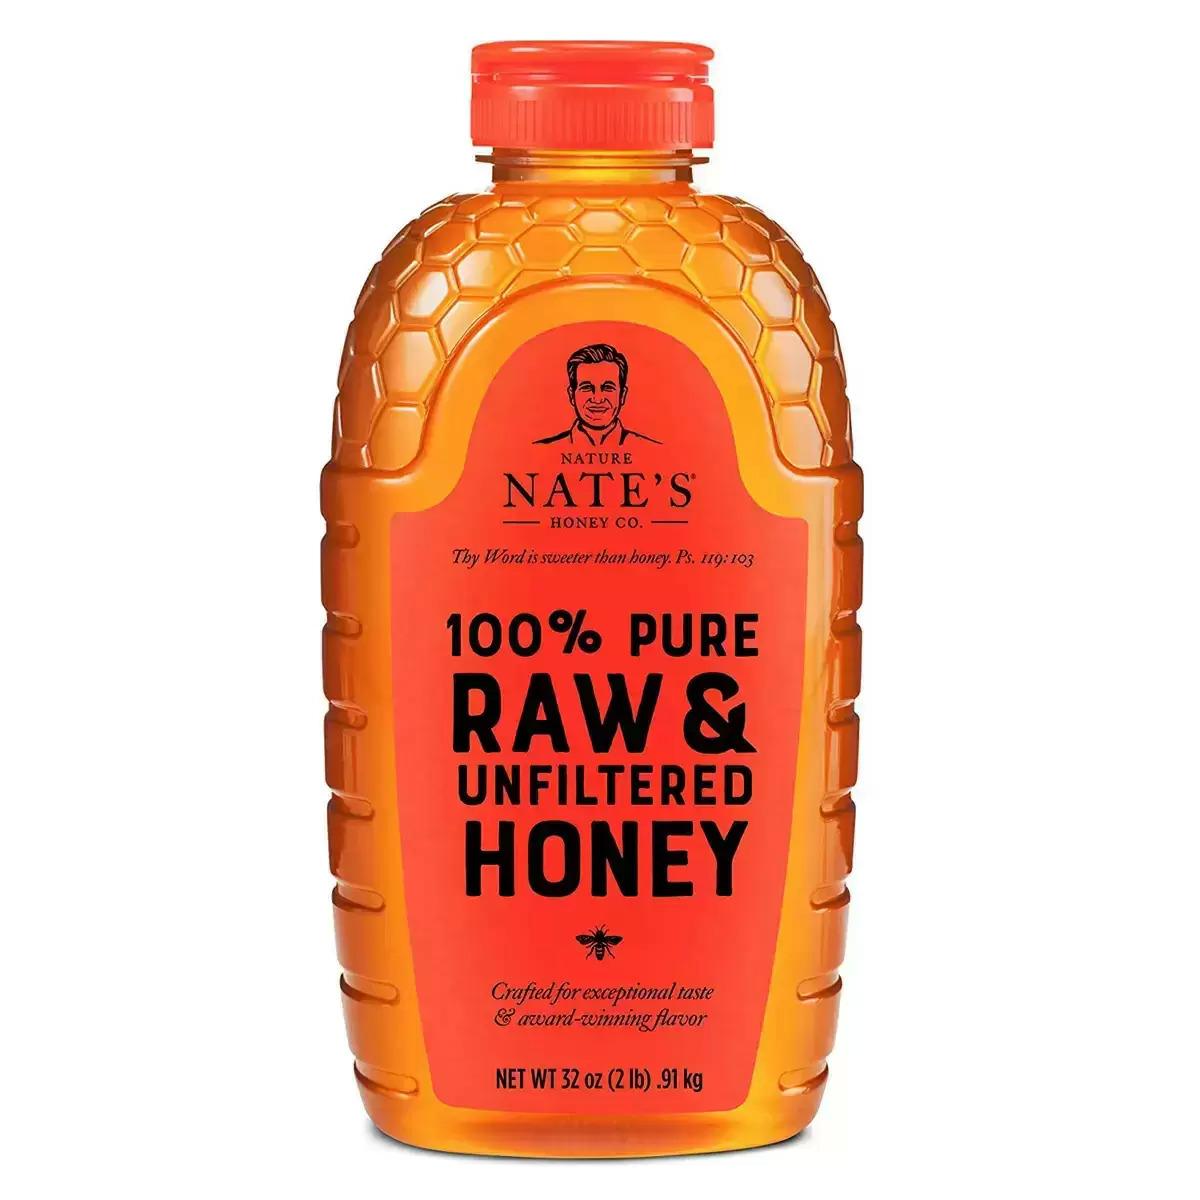 Nature Nates Pure Raw and Unfiltered Honey for $10.63 Shipped